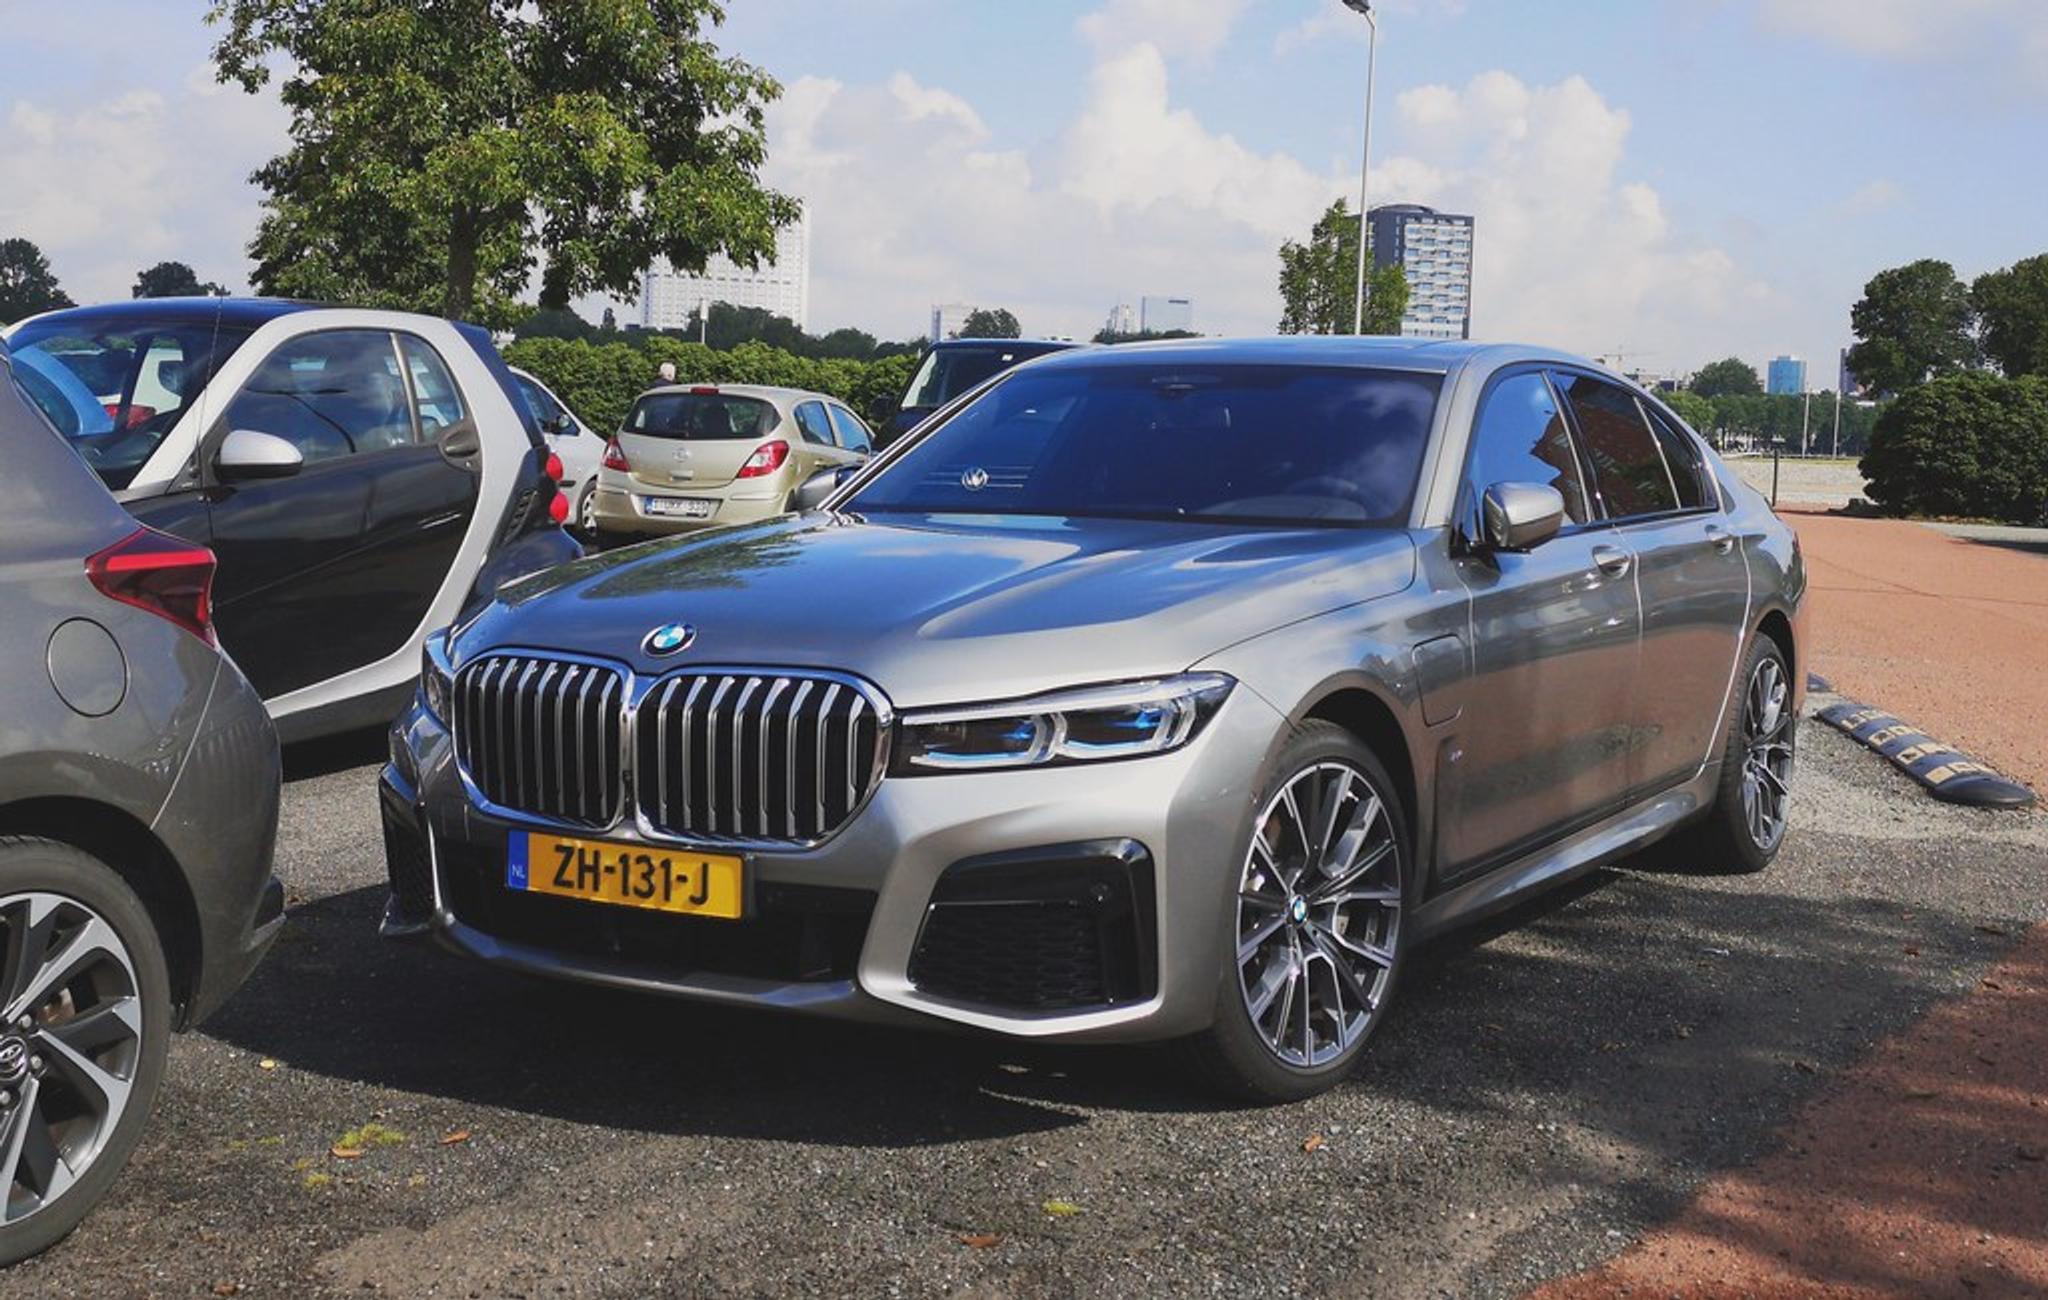 BMW 7 Series G11 in a city